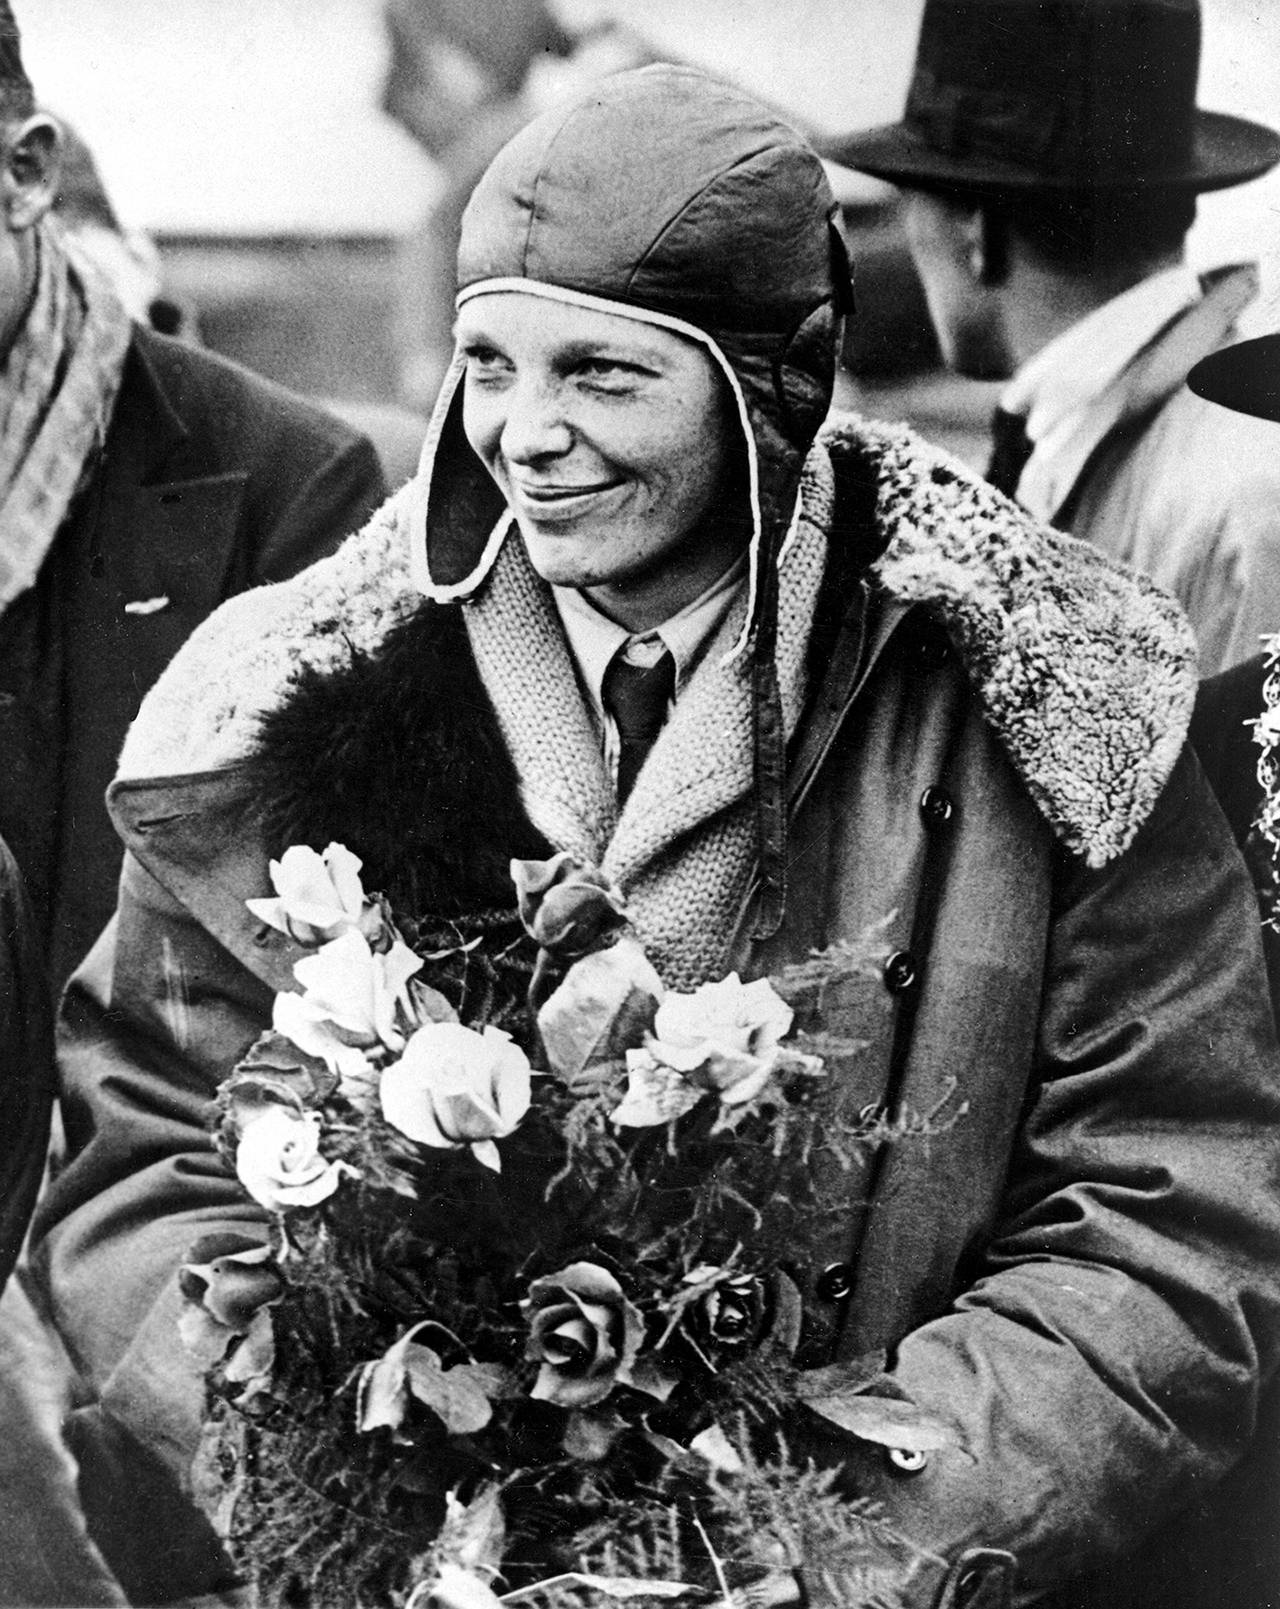 In a June 26, 1928 photo, American aviatrix Amelia Earhart poses with flowers as she arrives in Southampton, England, after her transatlantic flight on the “Friendship” from Burry Point, Wales. (AP Photo, File)